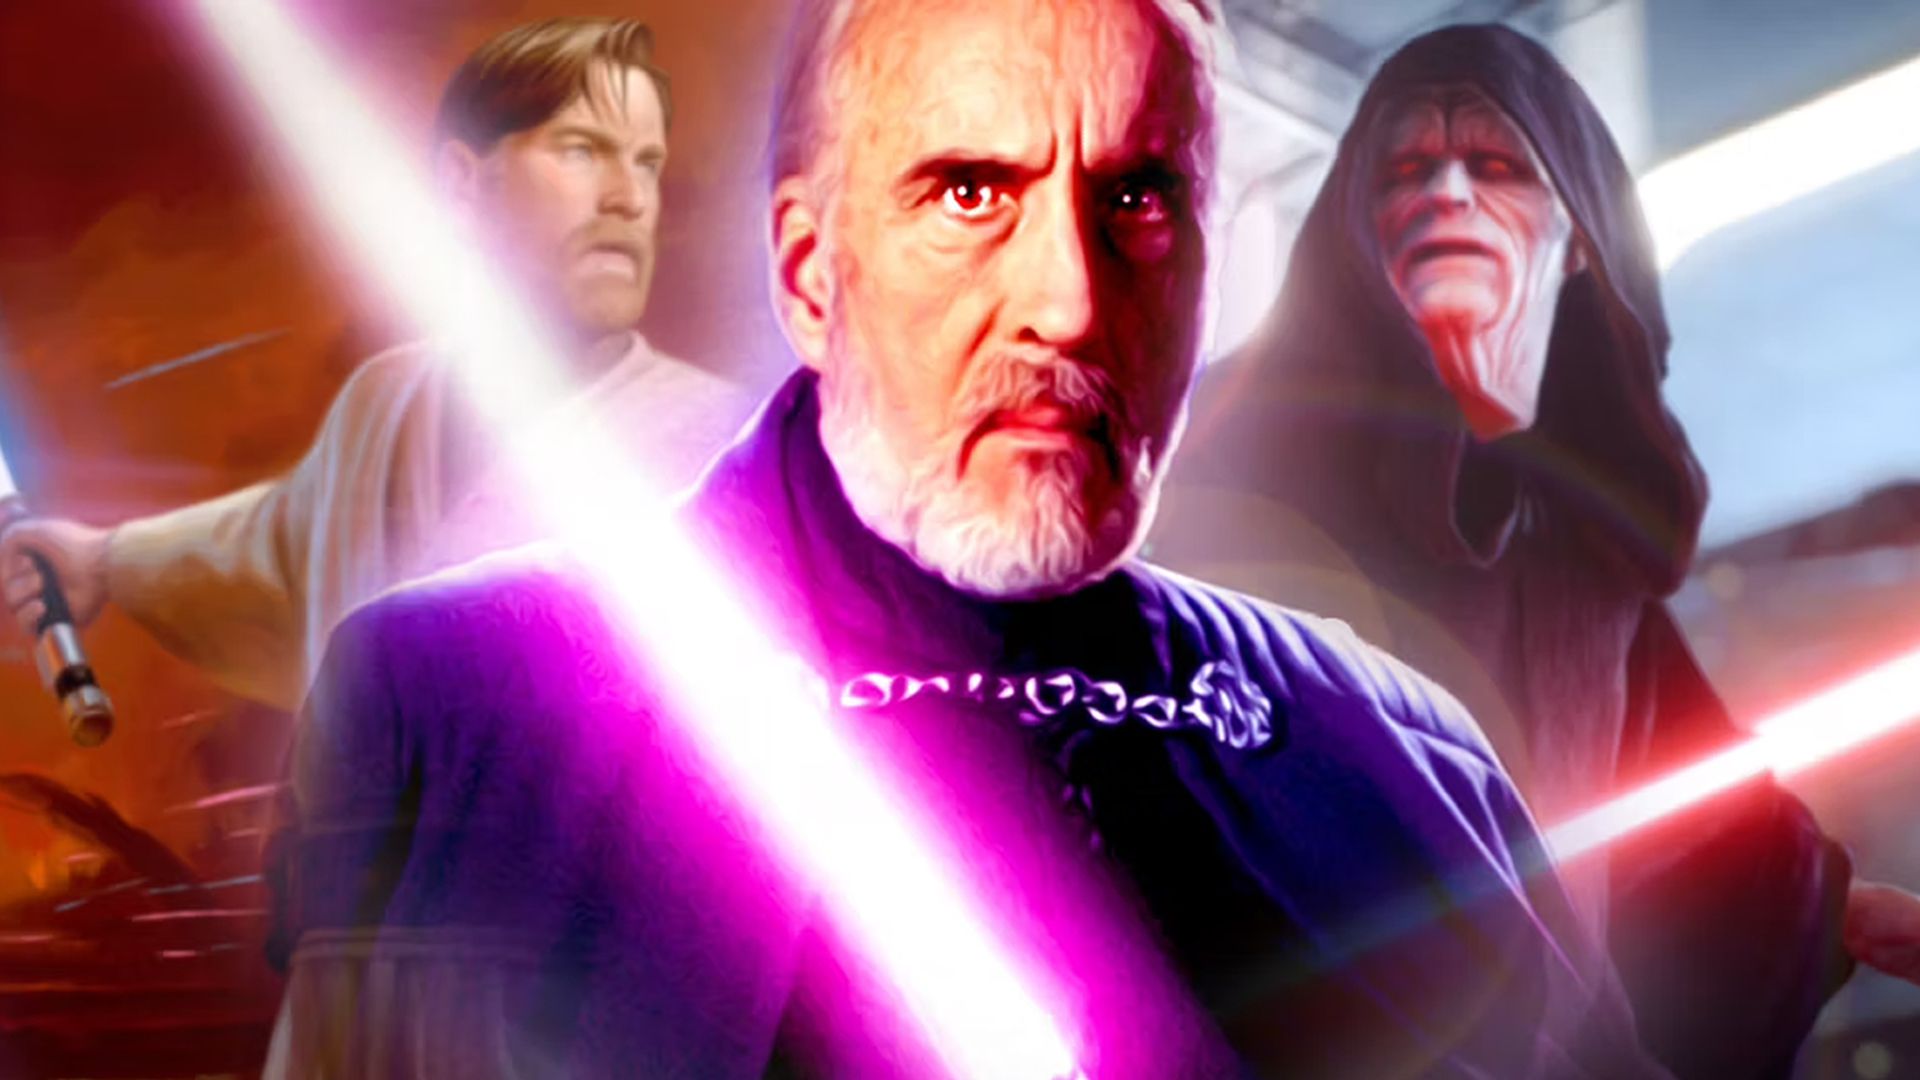 Count Dooku Was Never a Sith - and He Tried to Save Obi-Wan, Twice EMAKI